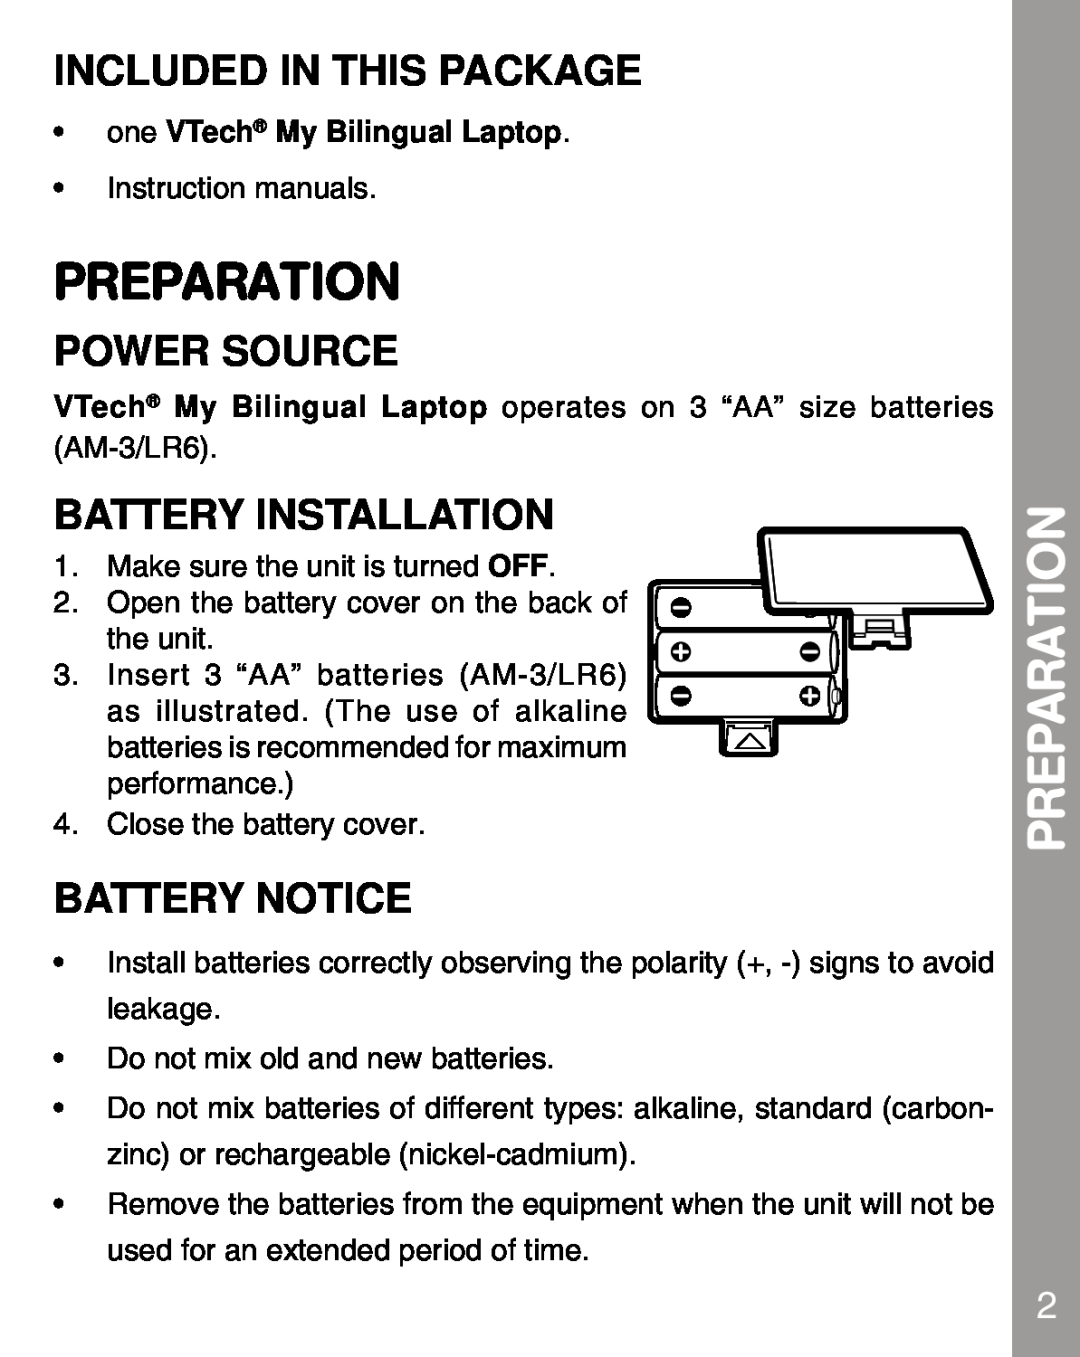 VTech 80-067848 user manual Preparation, Included In This Package, Power Source, Battery Installation, Battery Notice 